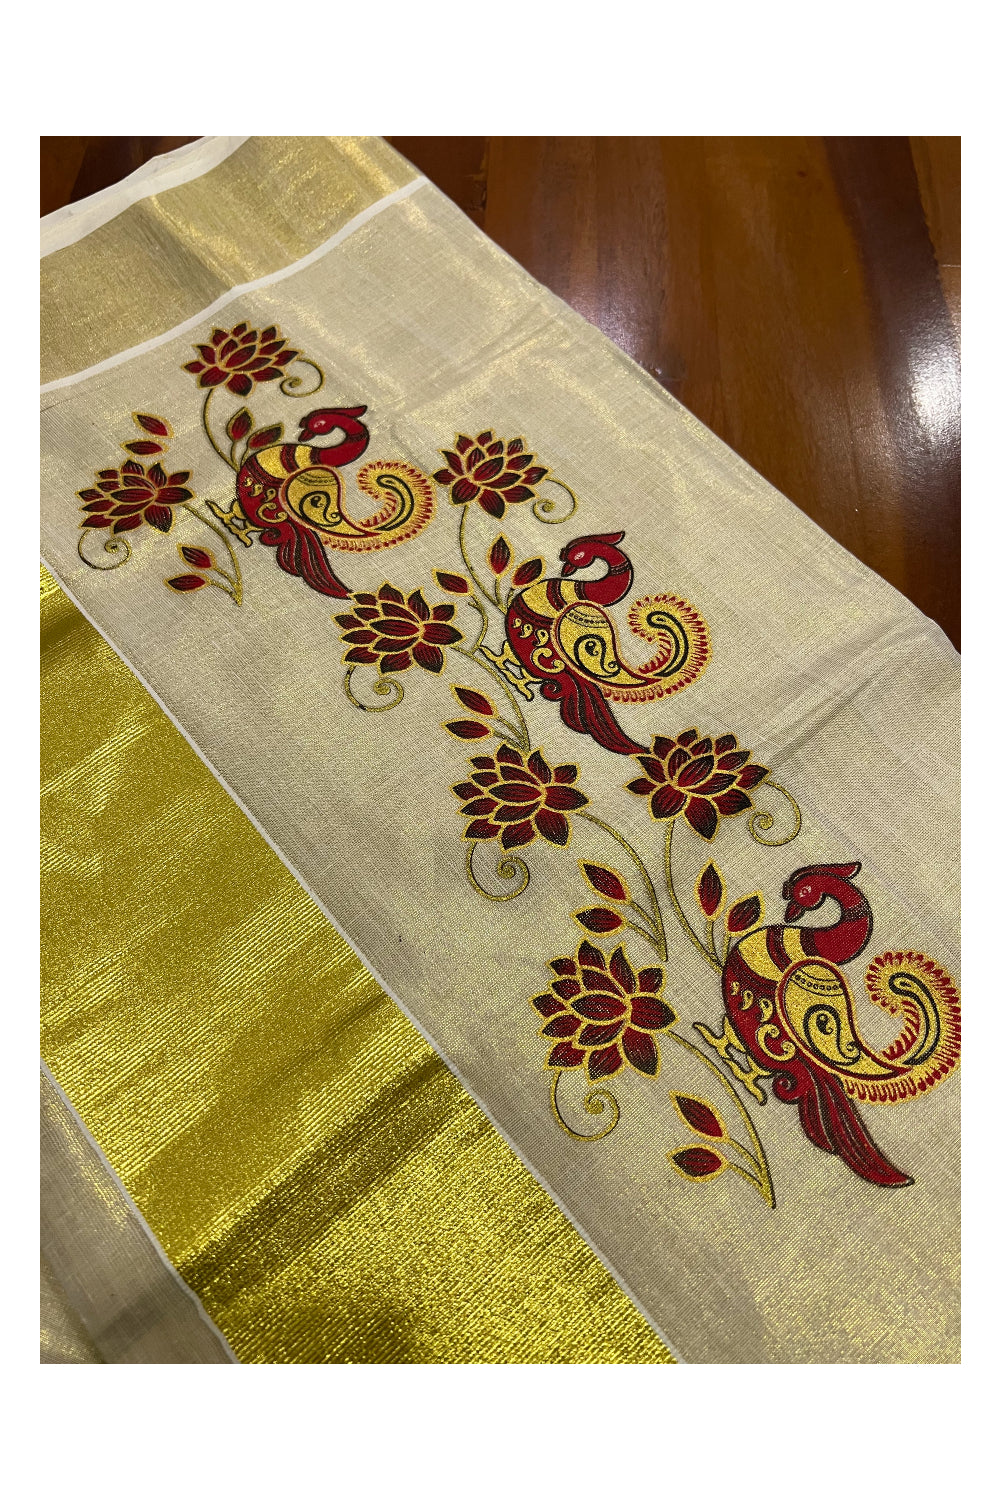 Kerala Tissue Kasavu Saree With Mural Red Peacock and Floral Printed Design